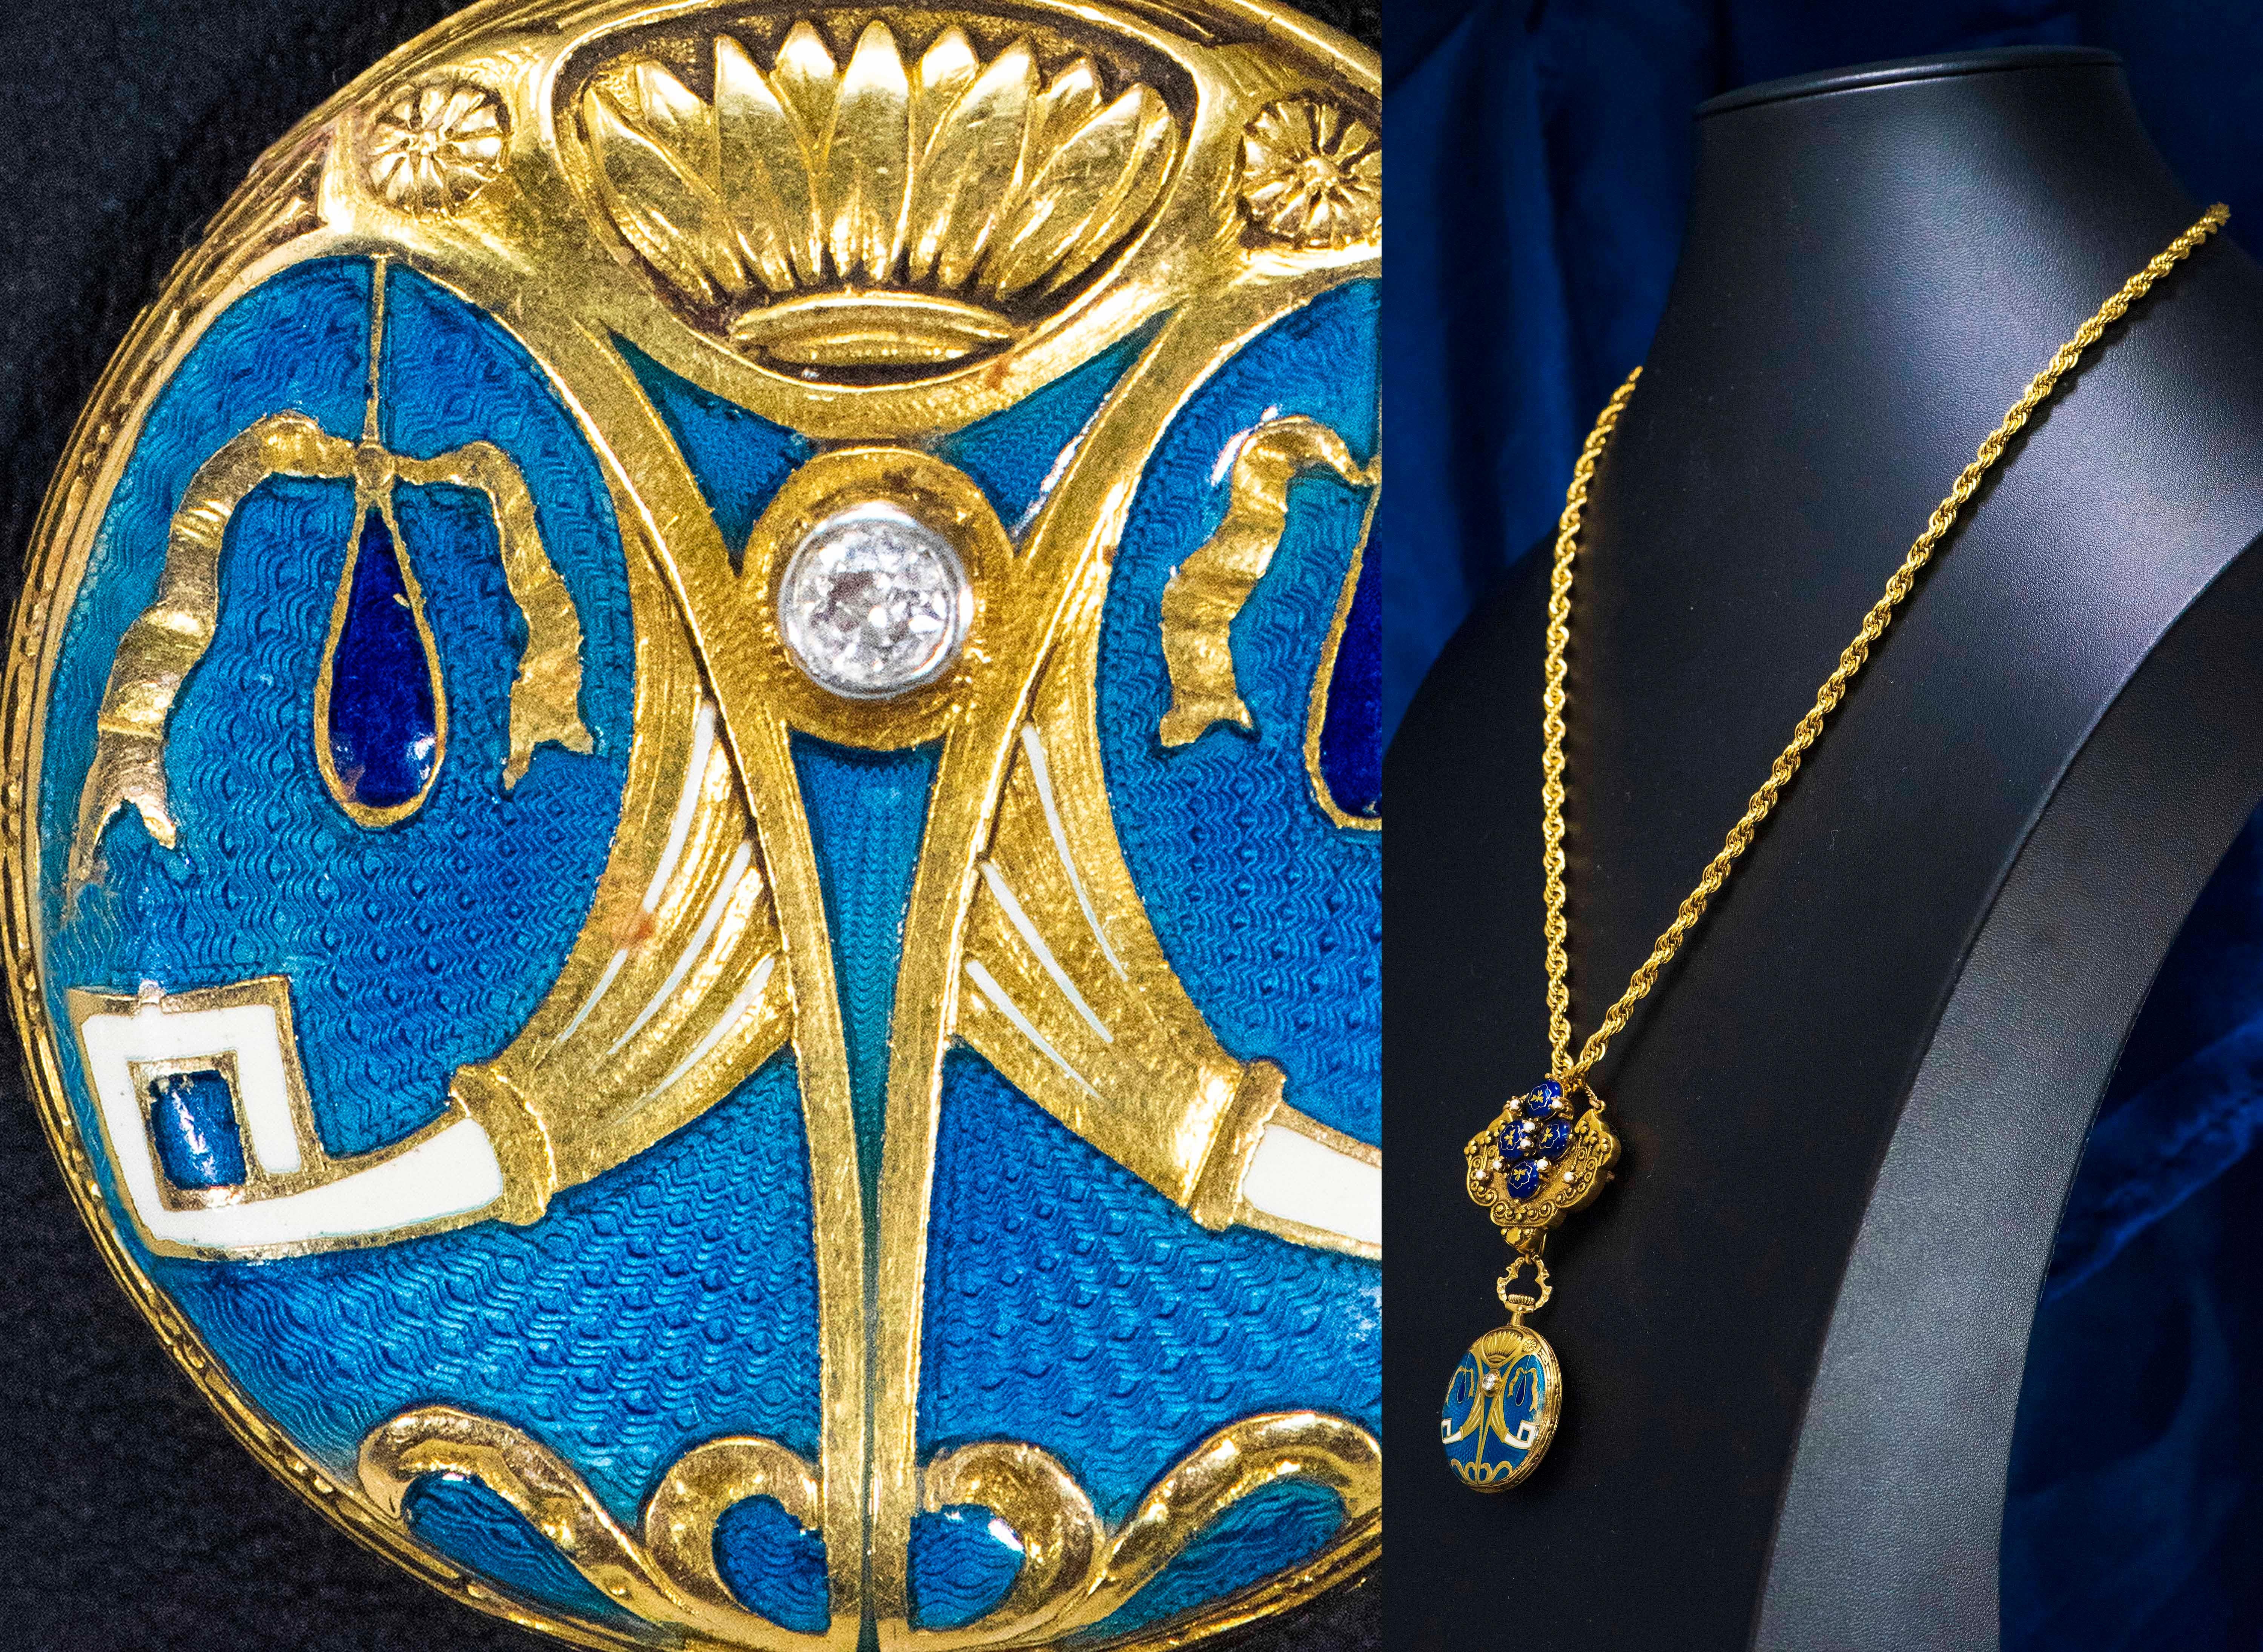 Dimensions:
The total drop when worn as a pendant on a chain is 71mm in length
from the top of pin to the bottom of watch 

The Measurements of the Blue Beaded Enamel Bee Motif & Pearl Set Lapel  Pin alone which is detachable is  31mm length x 35mm